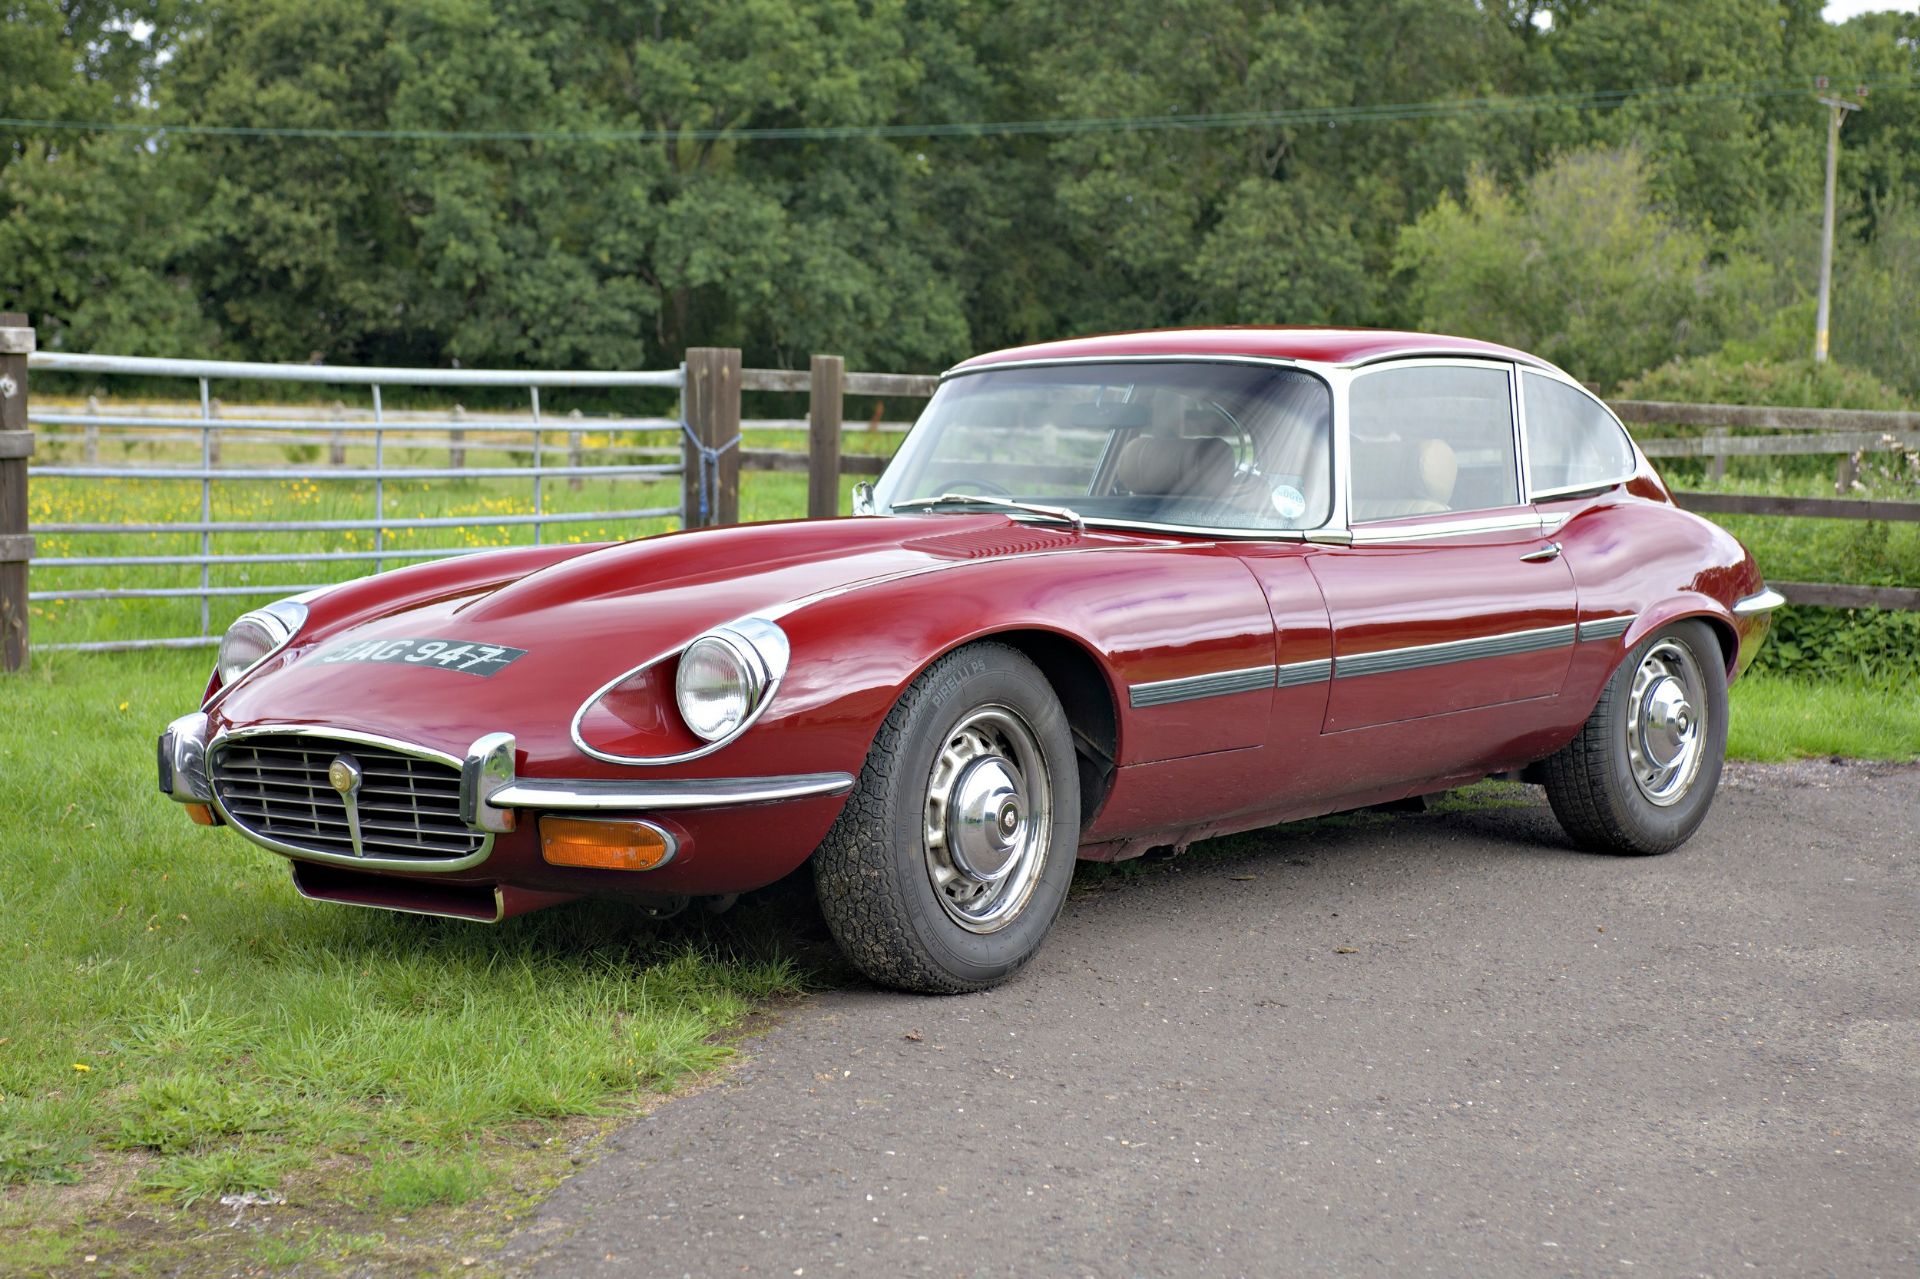 1972 JAGUAR E-TYPE SERIES III FIXED HEAD COUPE Registration: JAG 947 - Image 6 of 36